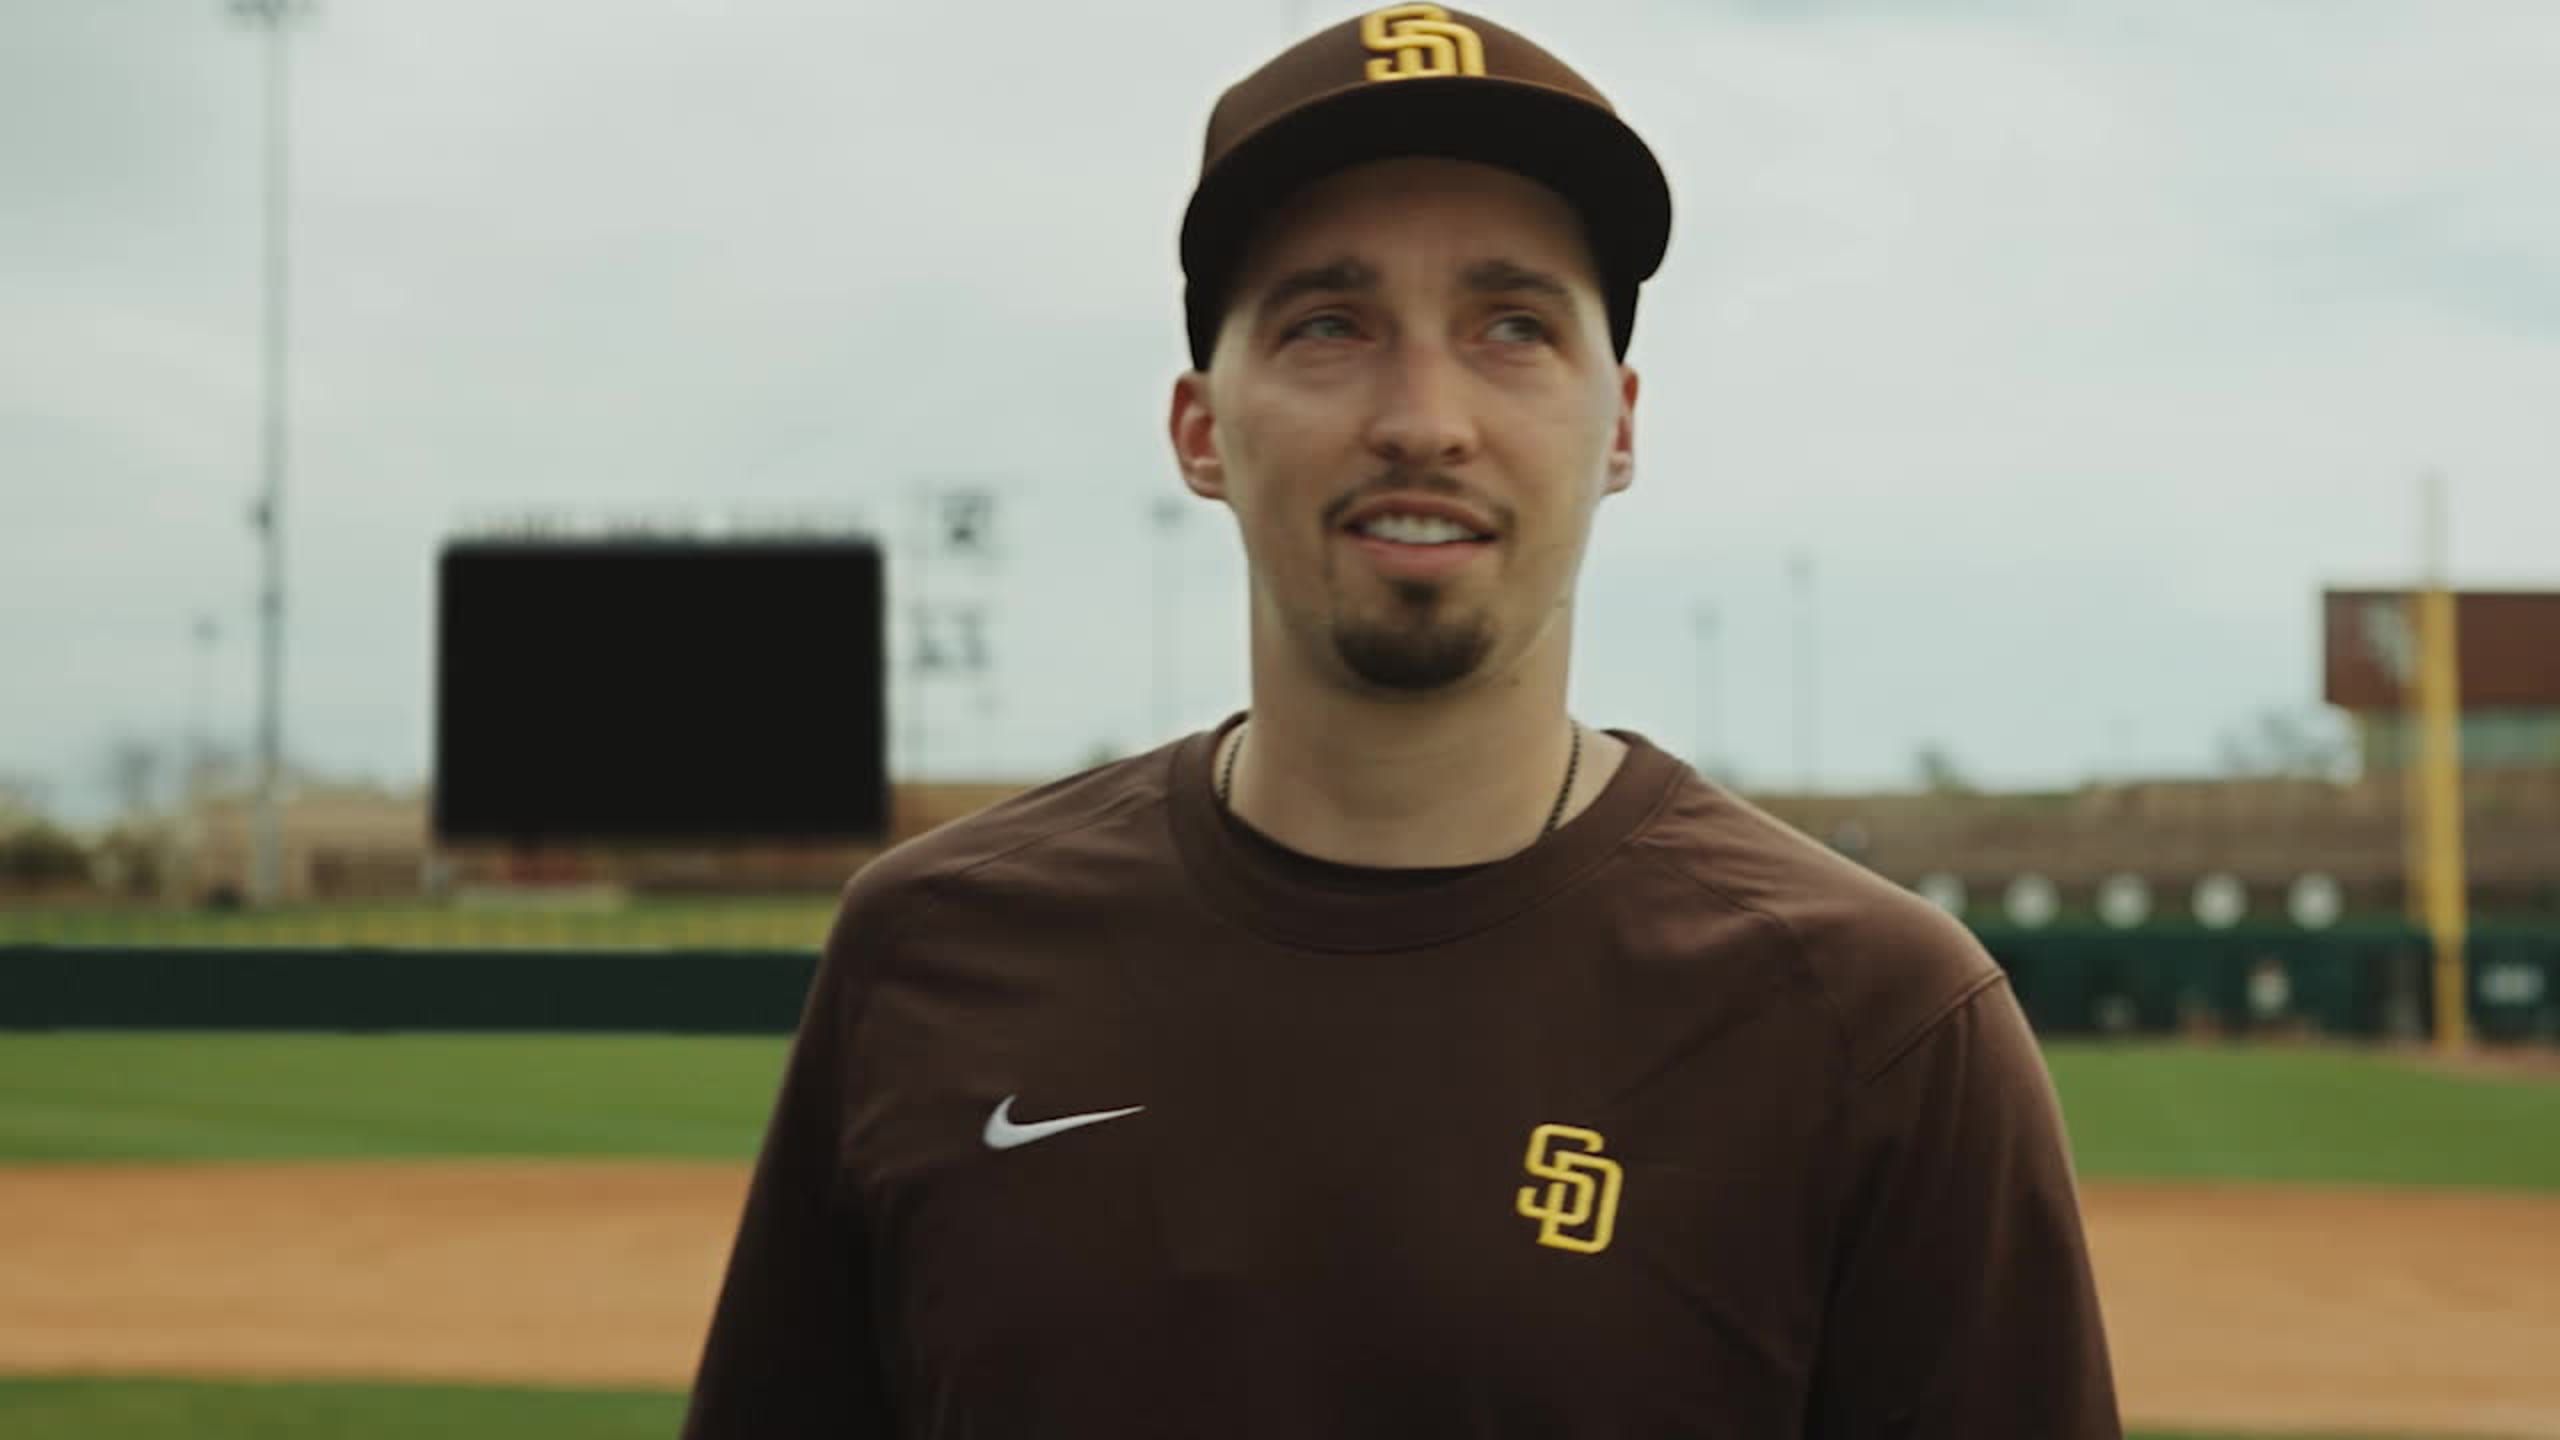 Padres Switch Spring Training Hats After Fans Say It Looks Like